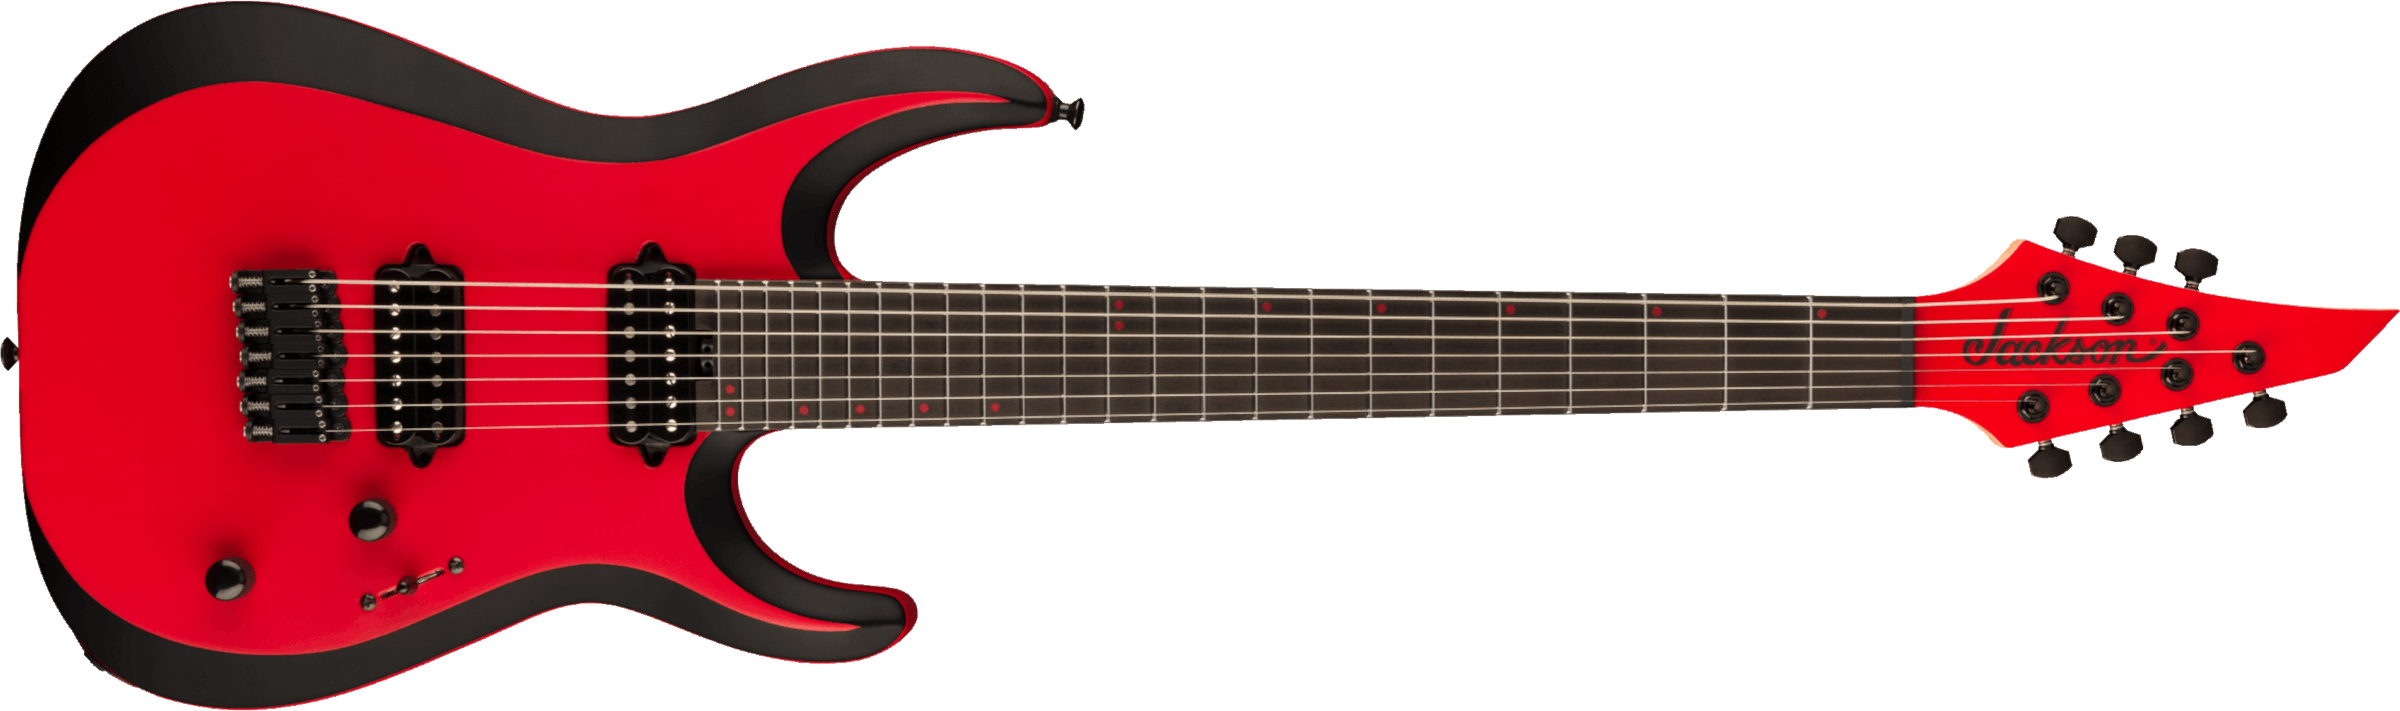 Jackson Dinky Mdk Ht7 Pro Plus 2h Bare Knuckle Eb - Satin Red W/black Bevels - 7 string electric guitar - Main picture